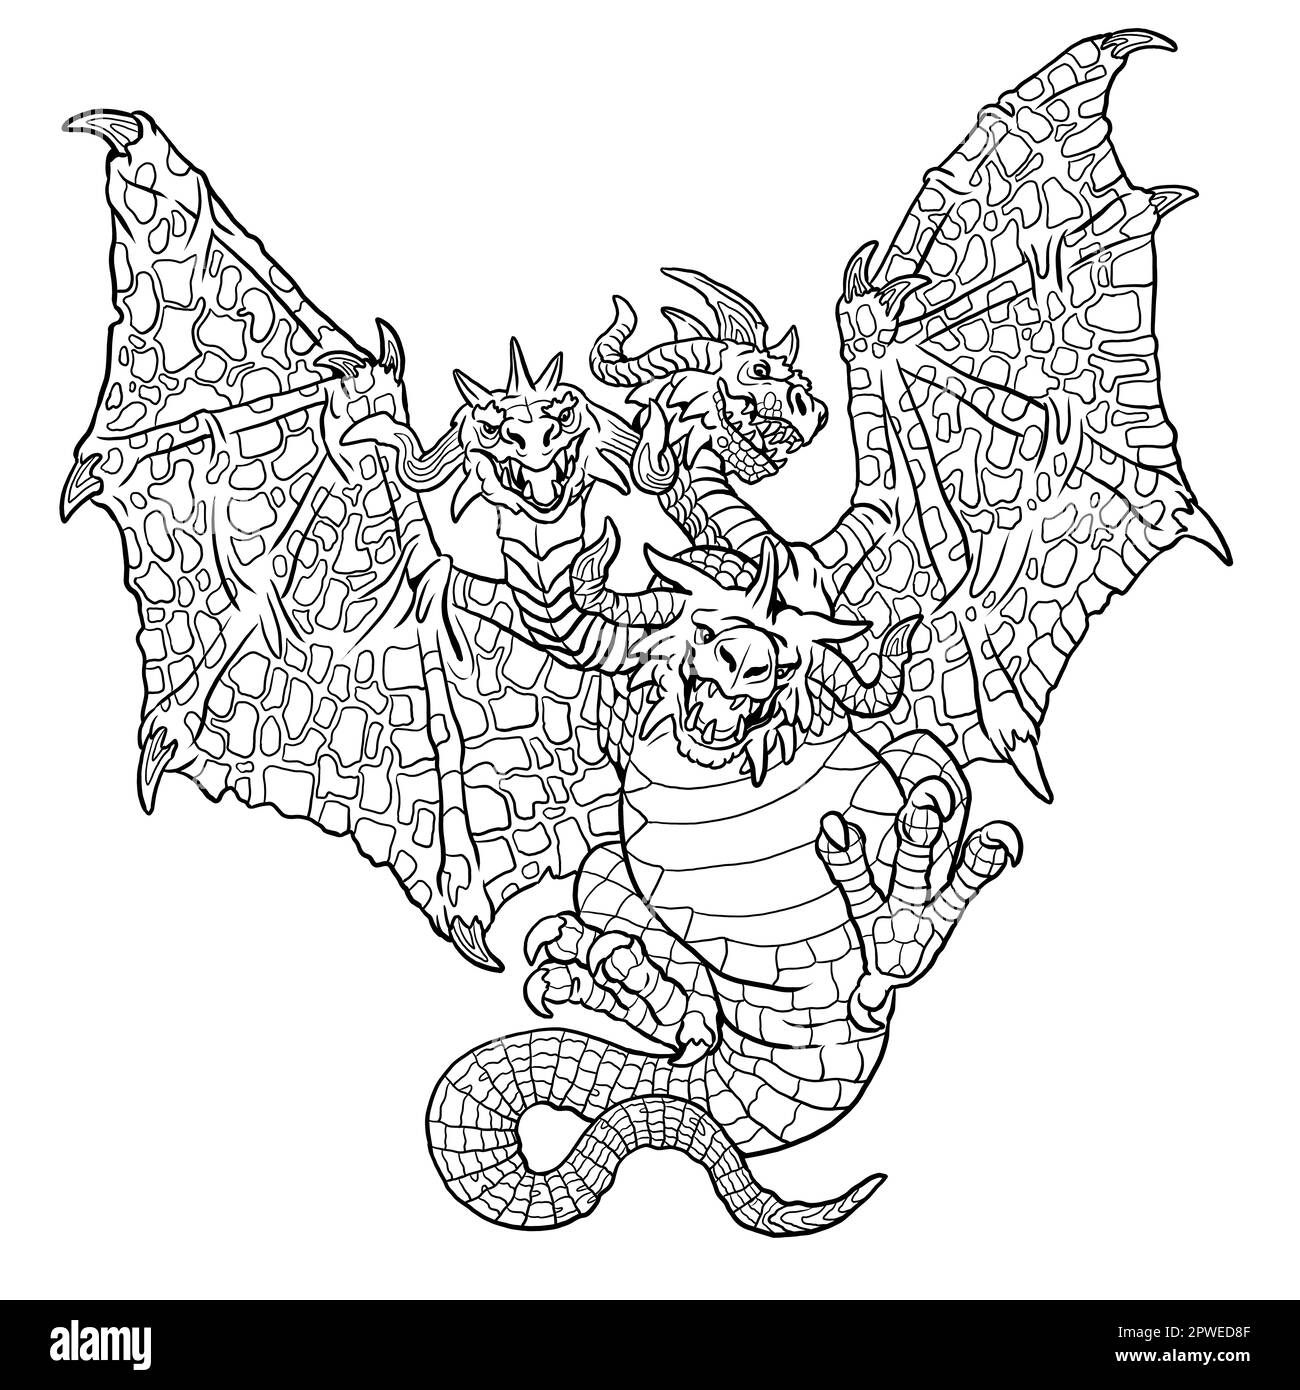 Dragon coloring page. Fantasy illustration with mythical creature. Dragon drawing coloring sheet. Stock Photo